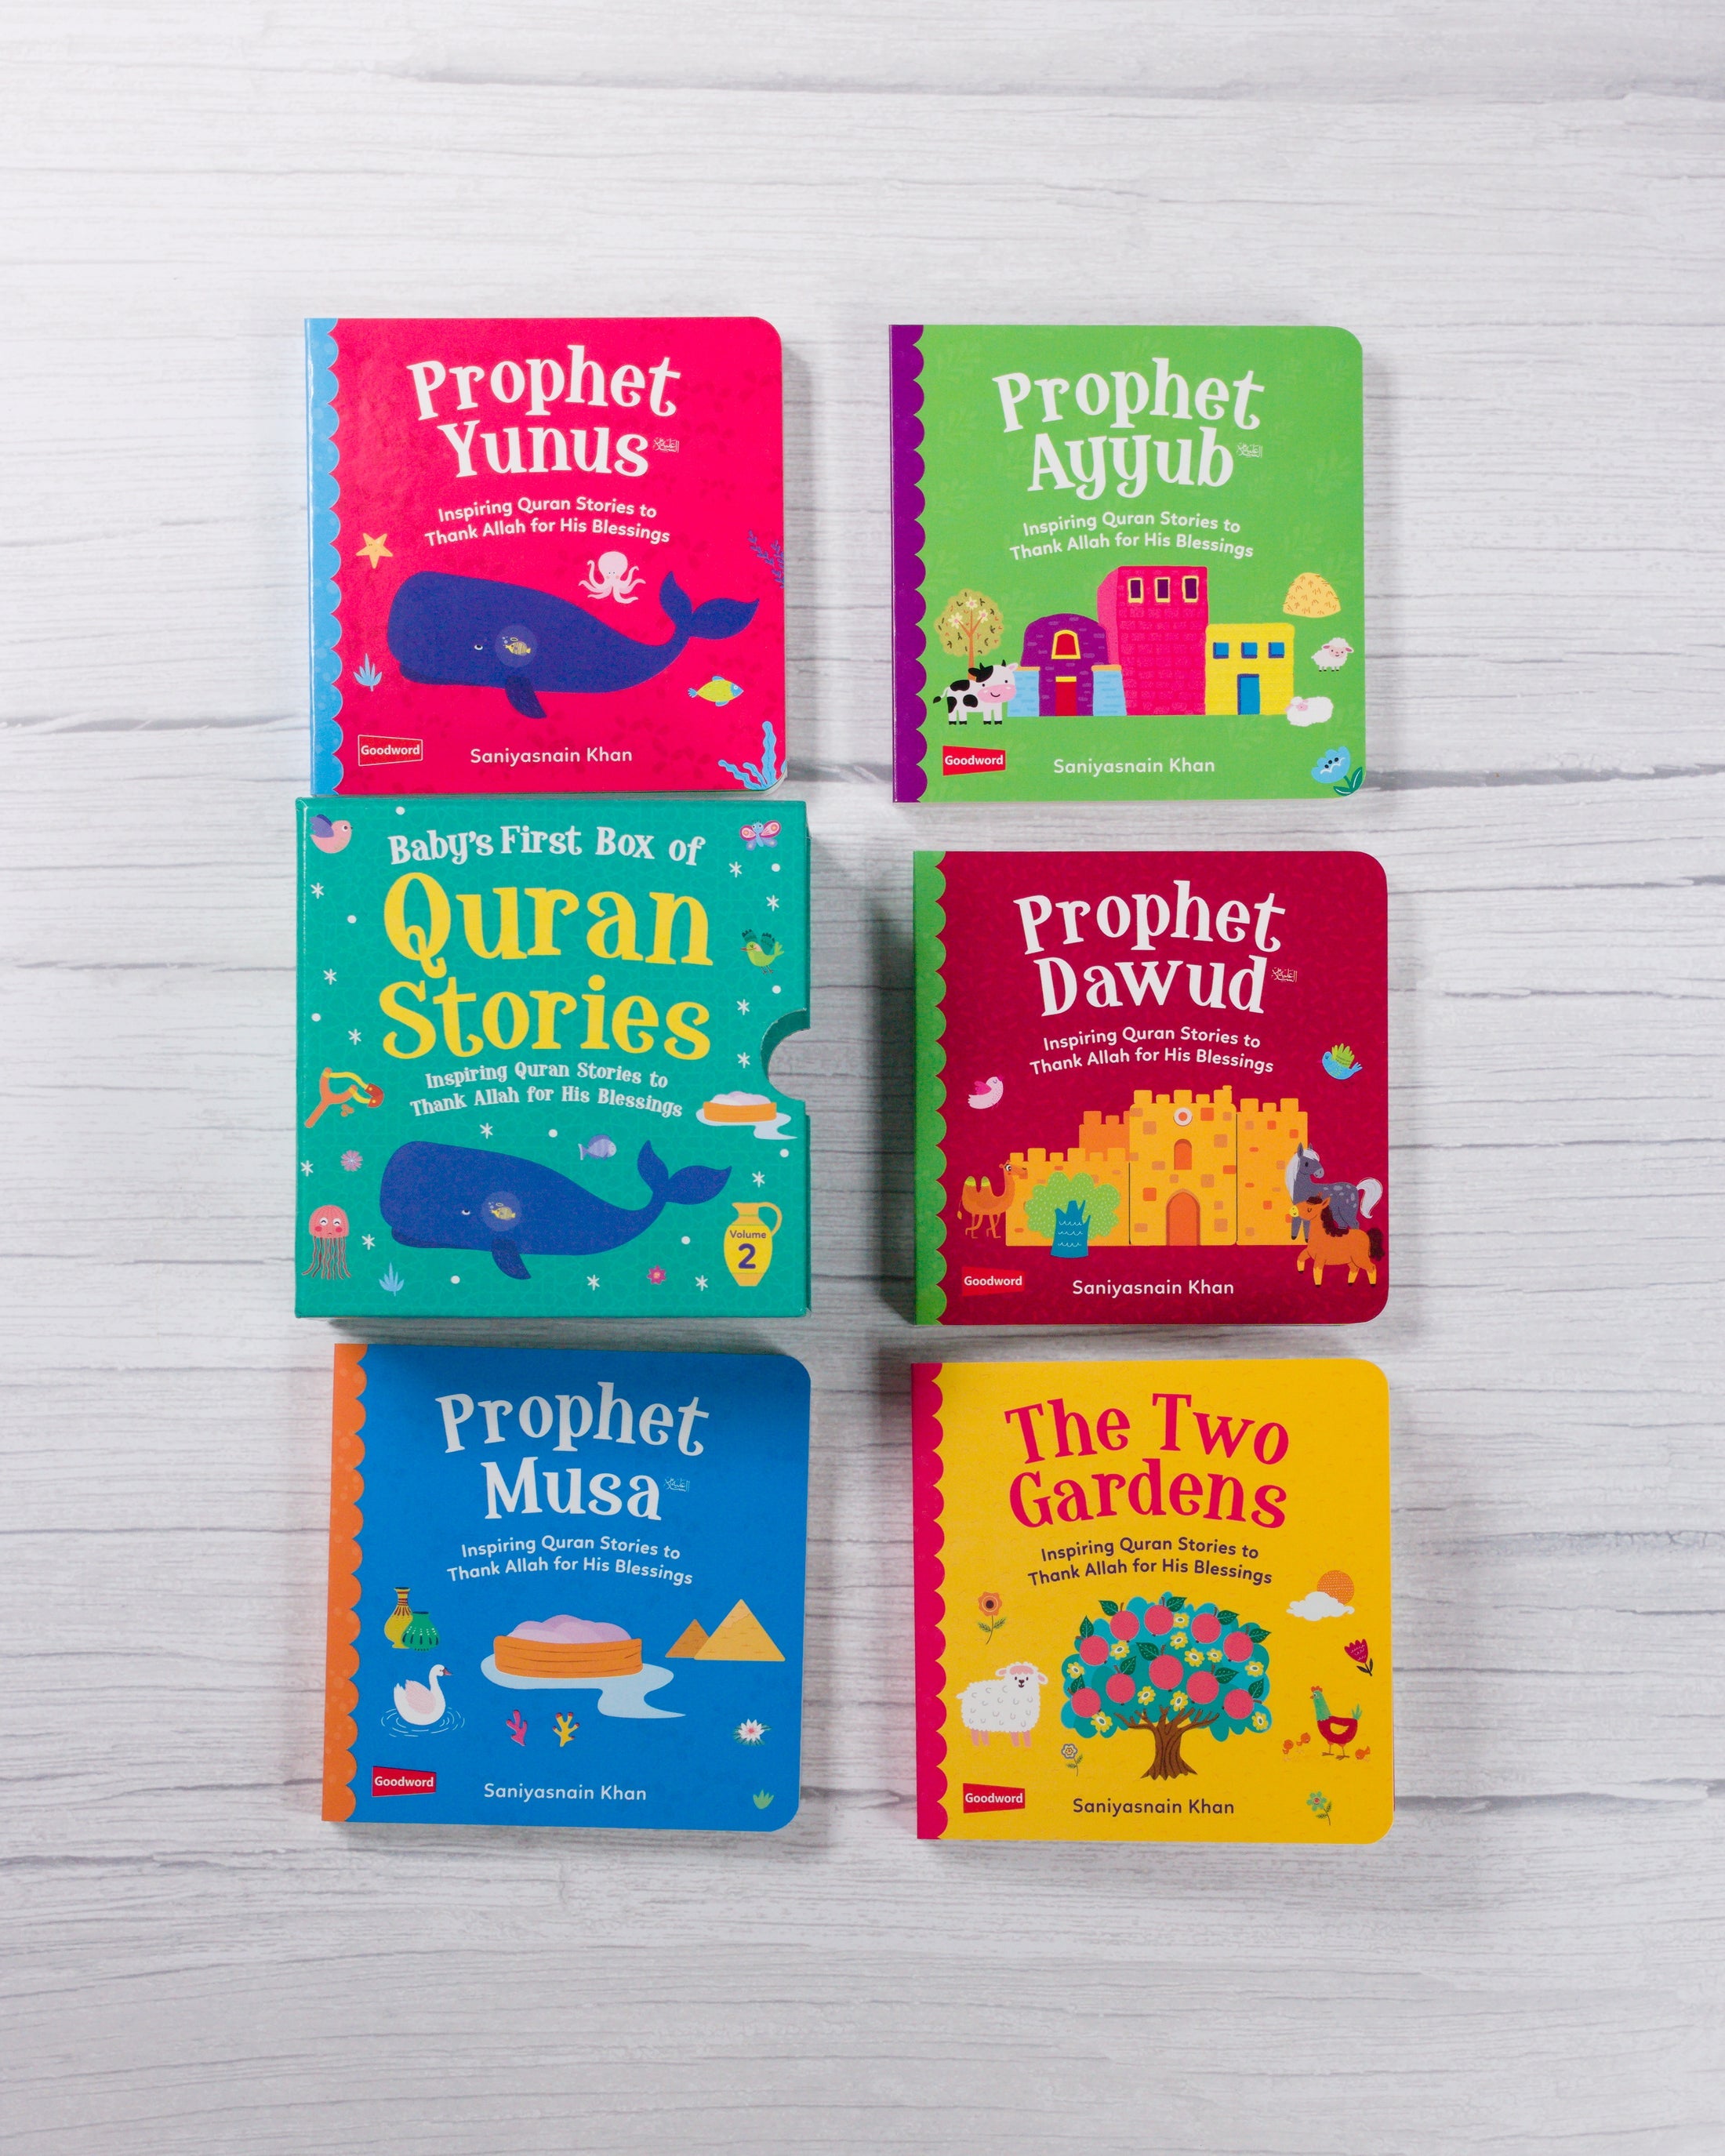 Baby's First Box of Quran Stories (Set of Five Board Books) Vol - 2 - The English Bookshop